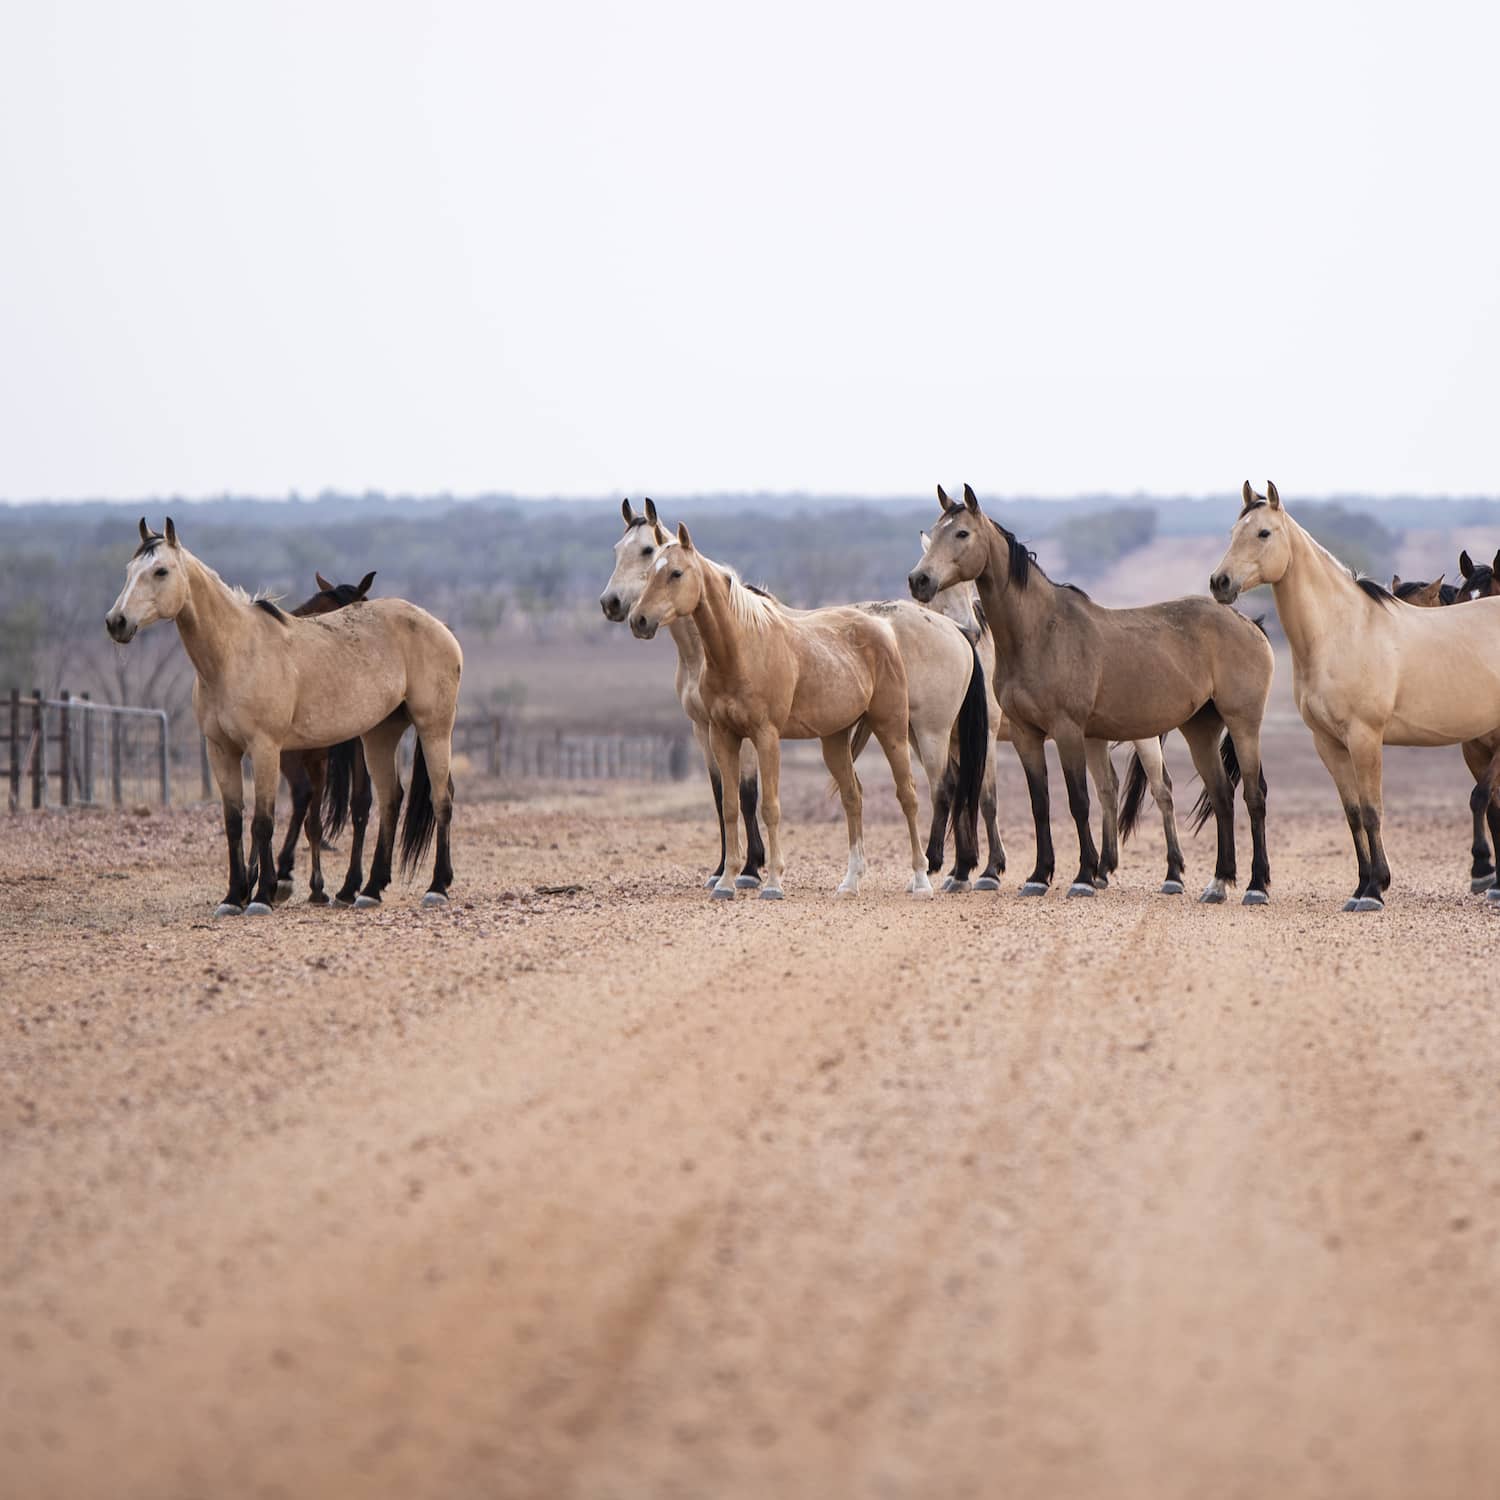 A group of horses standing on an outback roadway